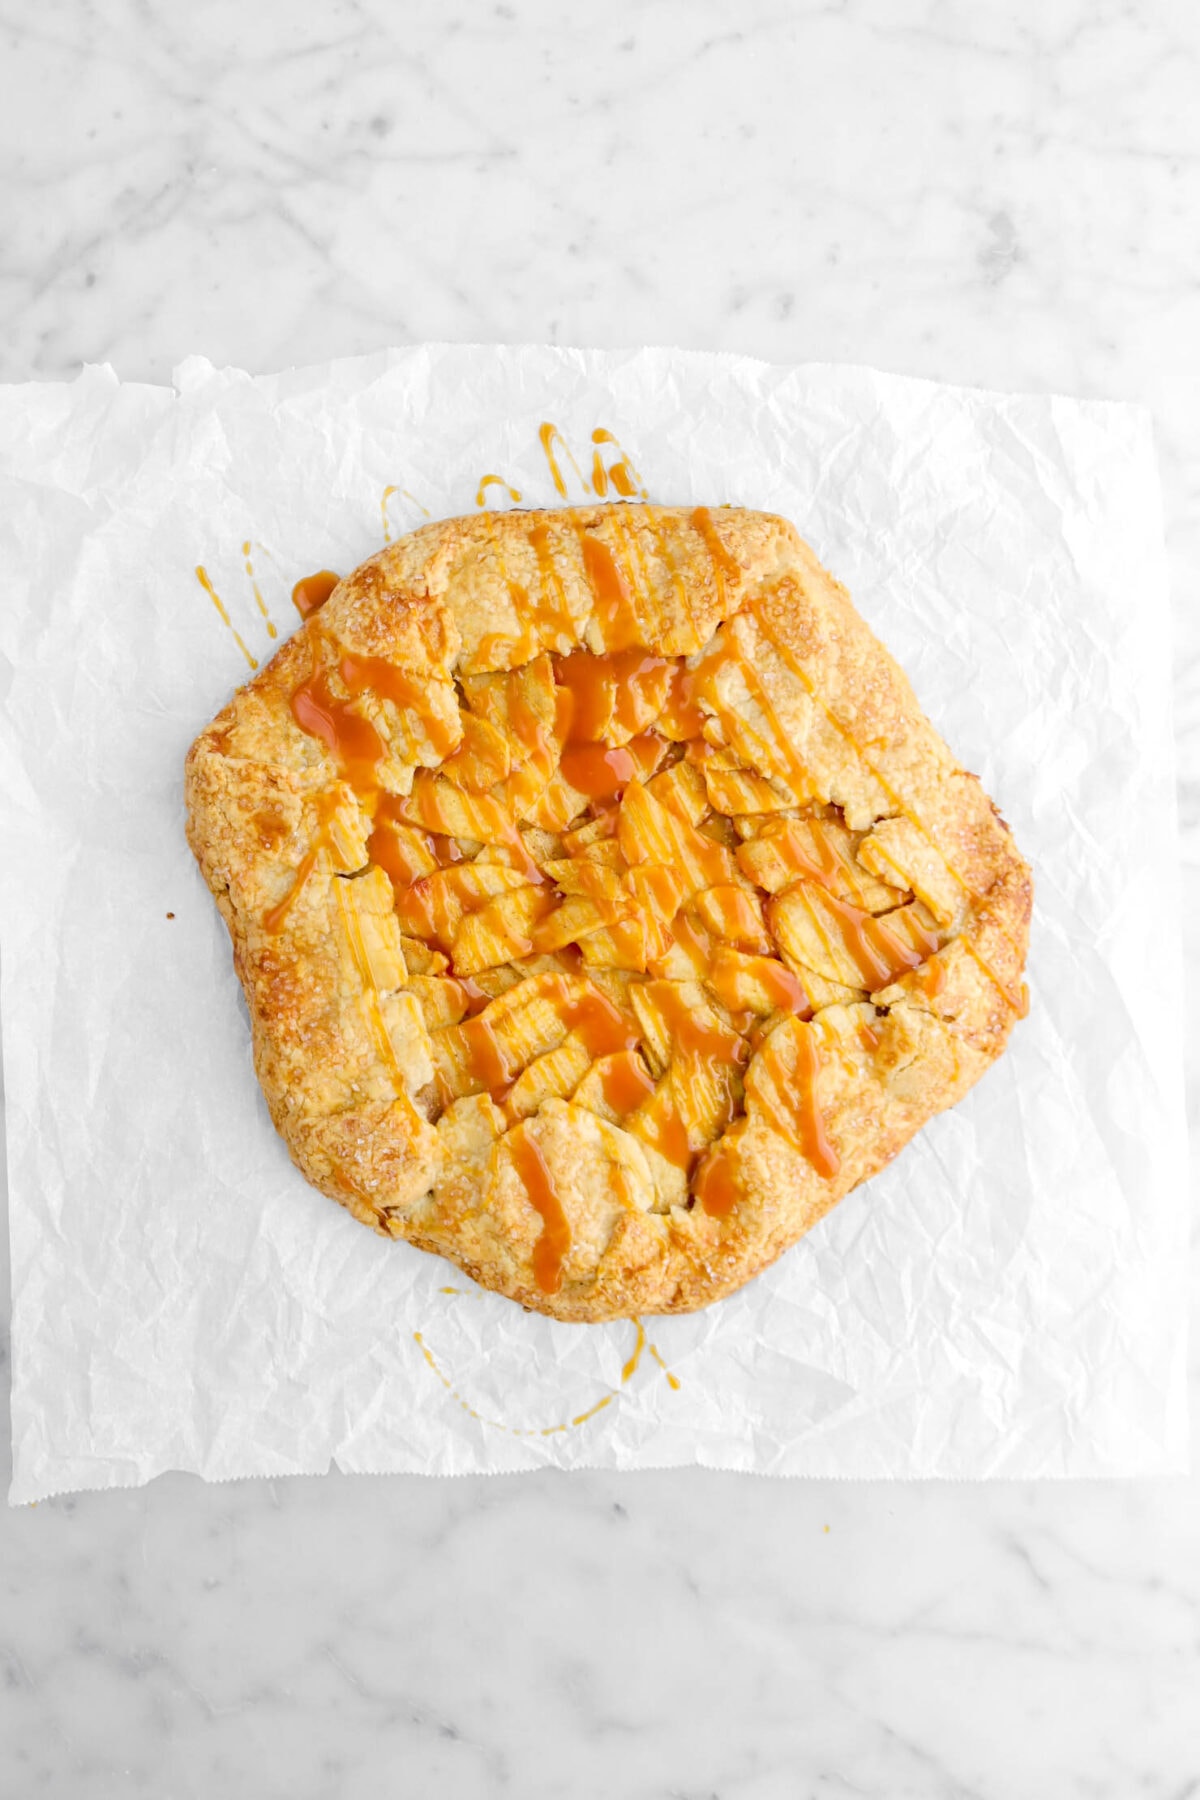 caramel drizzled over galette